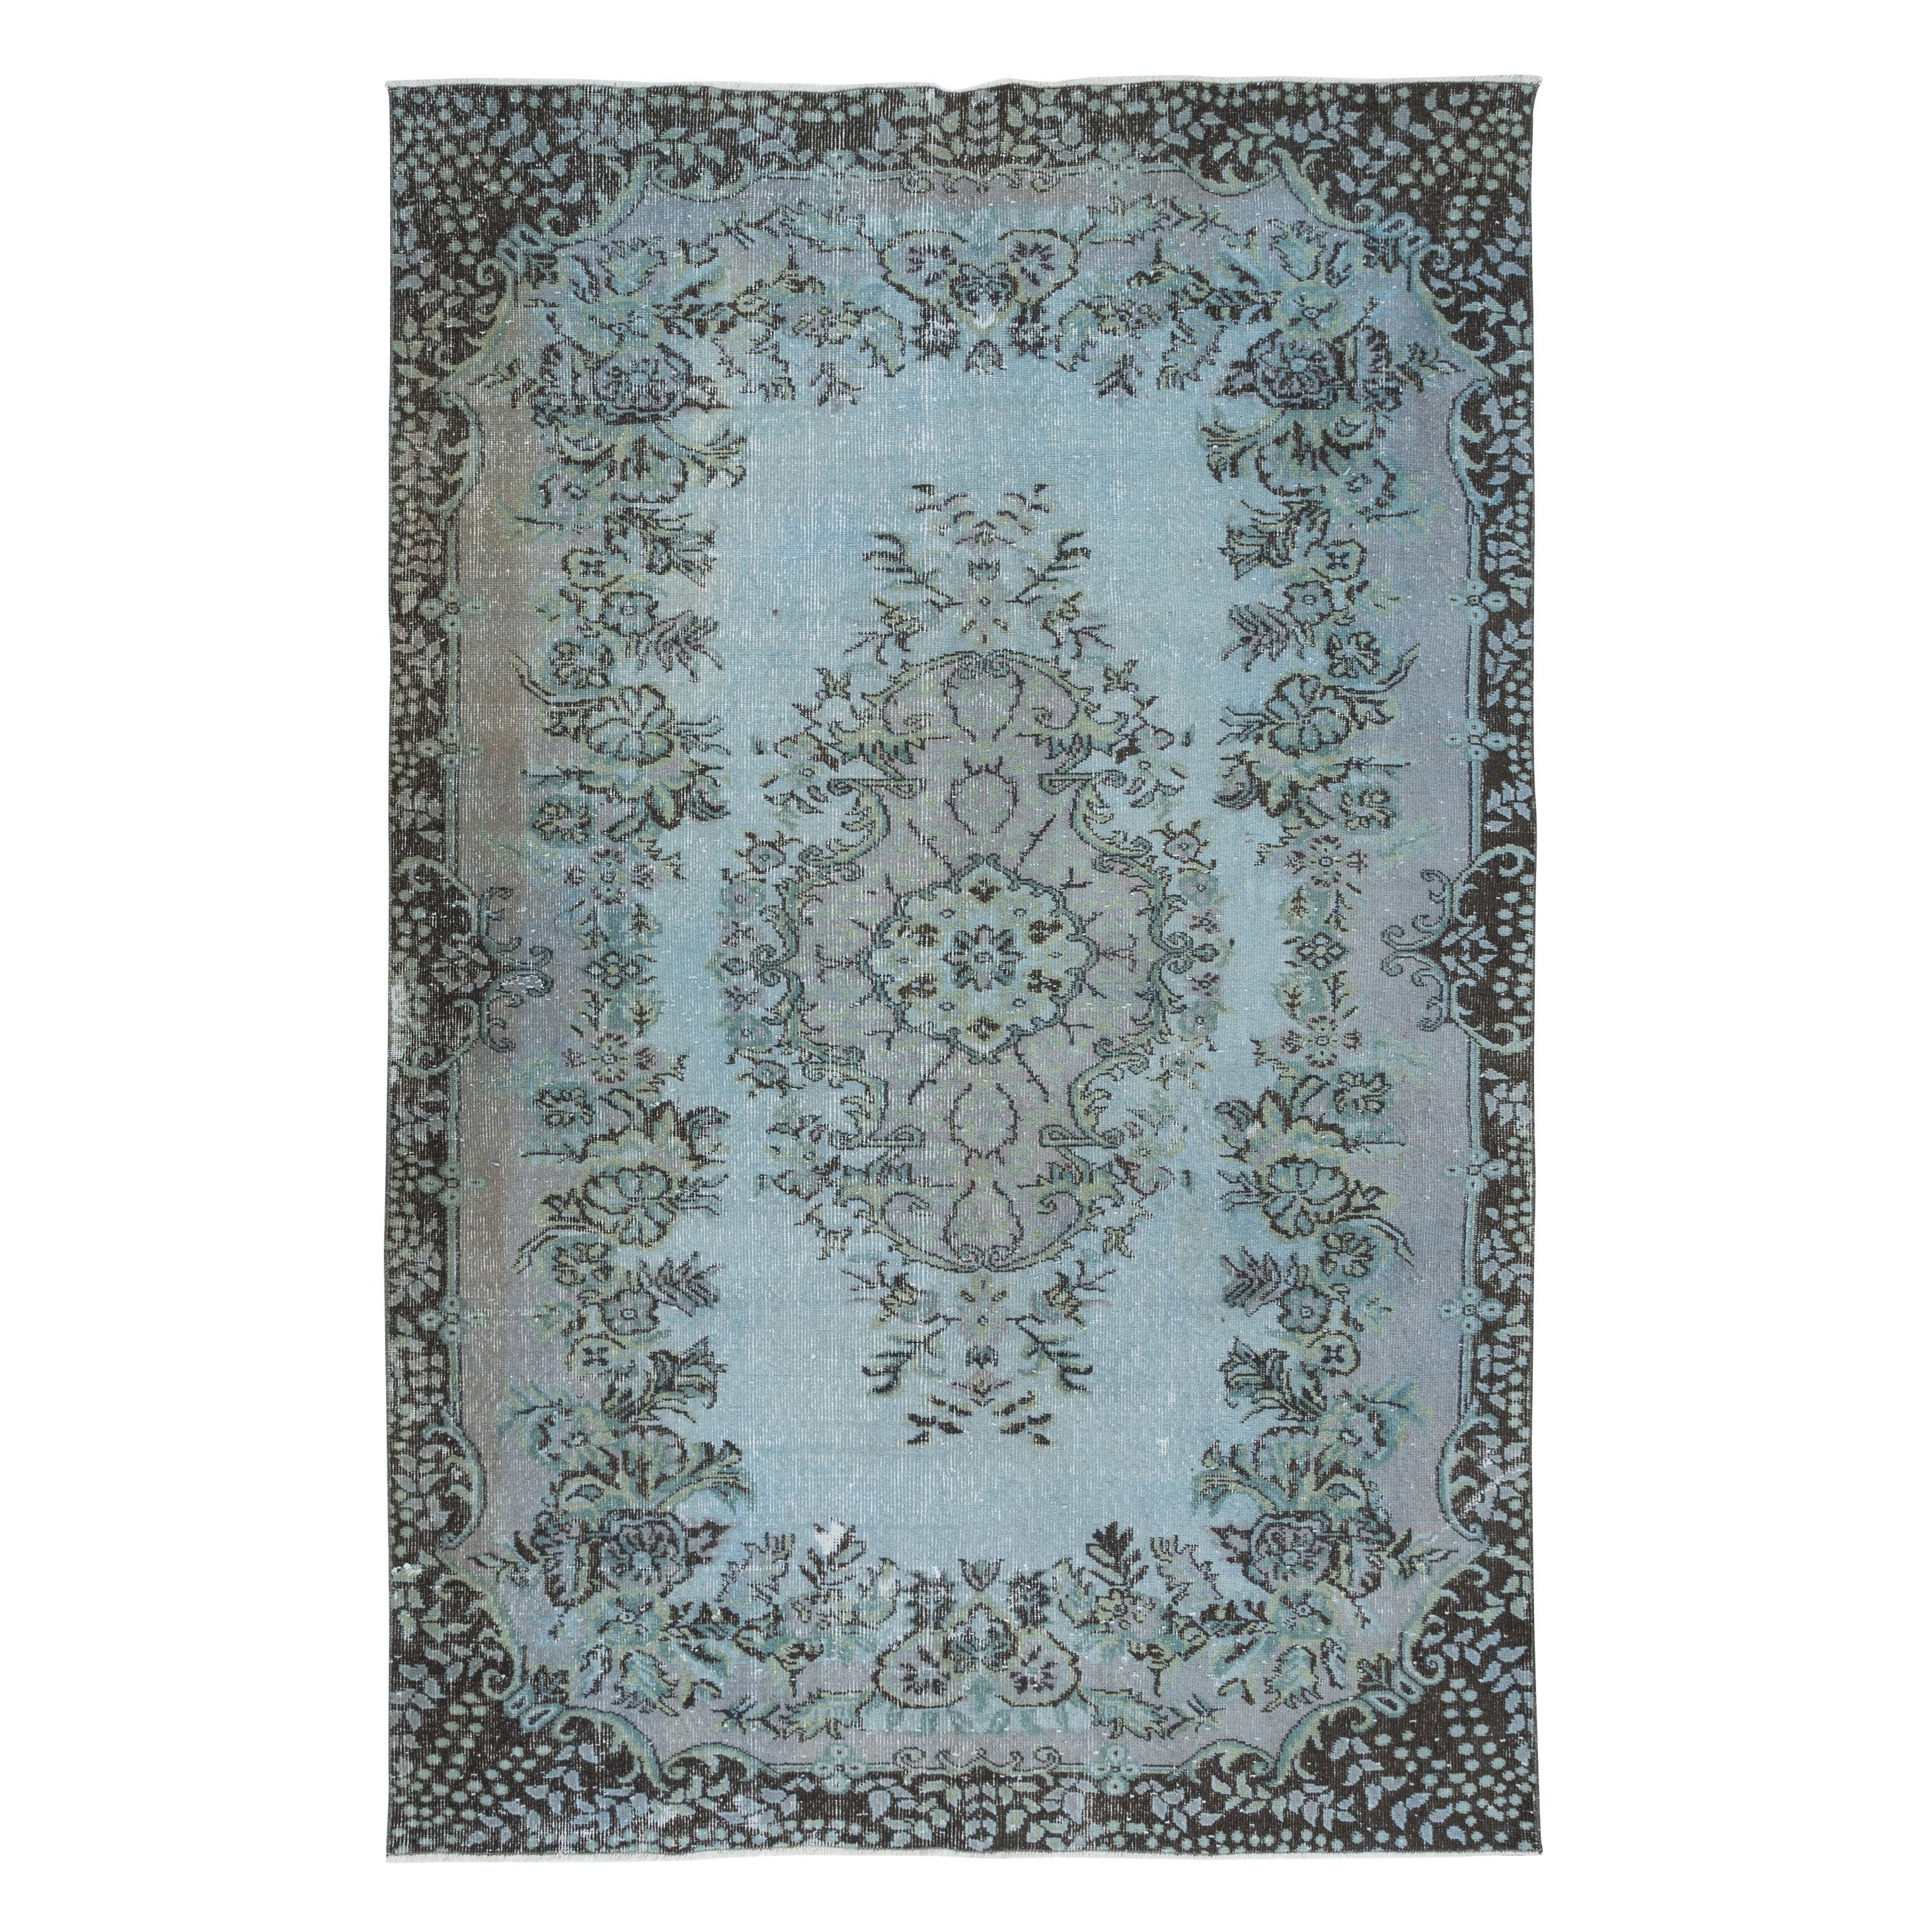 5.8x9 Ft Contemporary Handmade Turkish Area Rug in Baby Blue, Soft Pink & Black For Sale